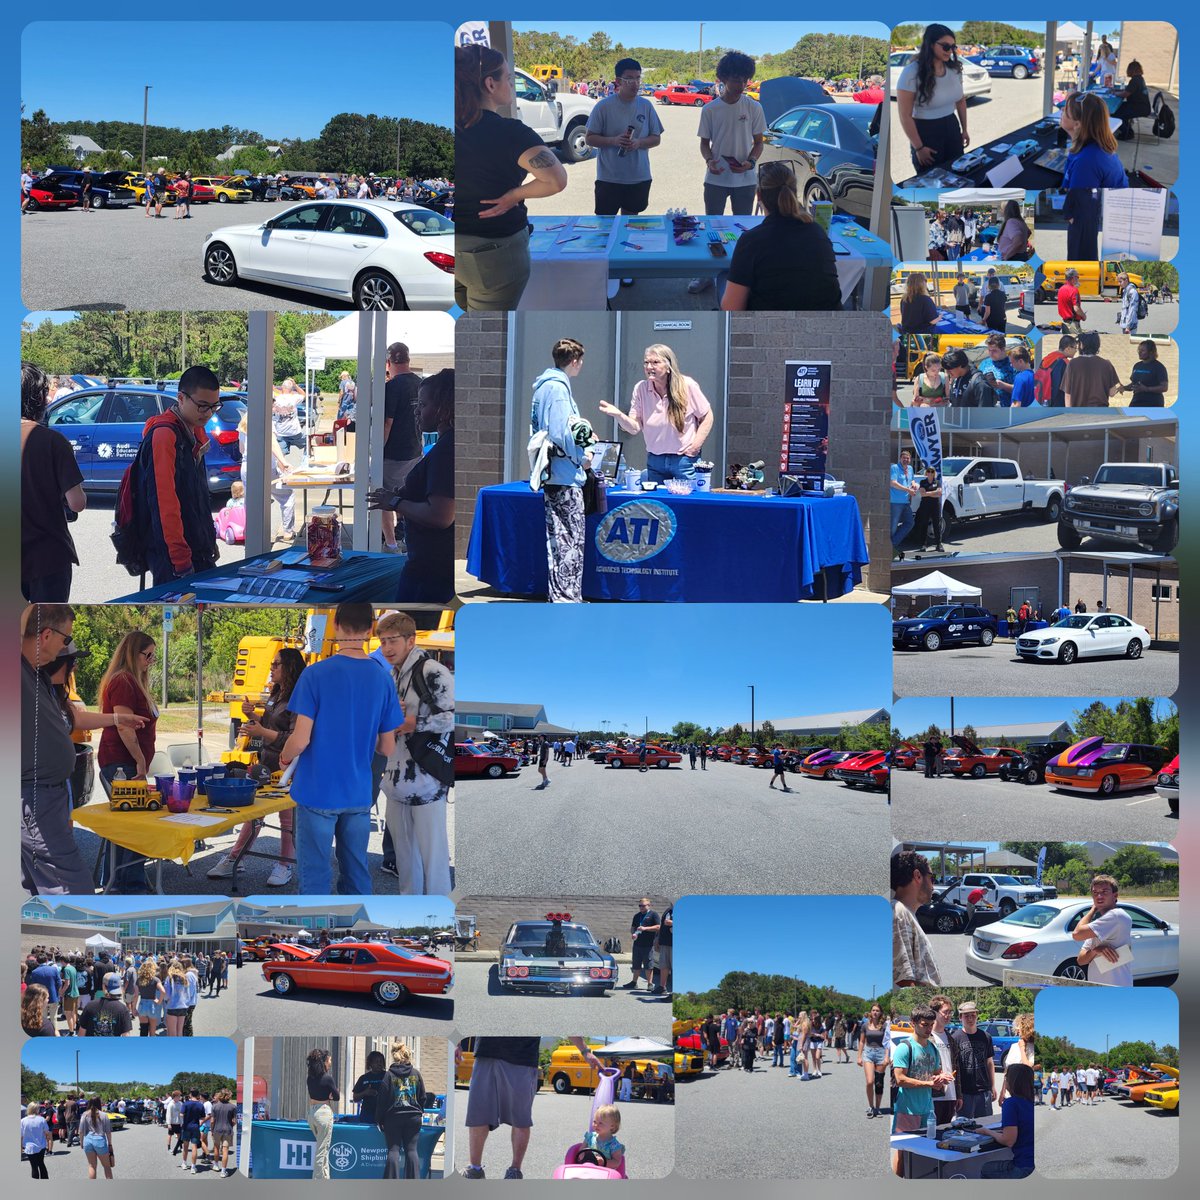 Great turnout for our 1st Transportation Careers Fair and Auto Showcase. Thanks to the OBX Rod and Custom participants and partners like @COA_Dolphins @NCWorks_NEPZ @LincolnTech @UTITweet @newportshipyard @GMGGroupllc @yachtworld  @Daretolearn_DCS @CTEforNC